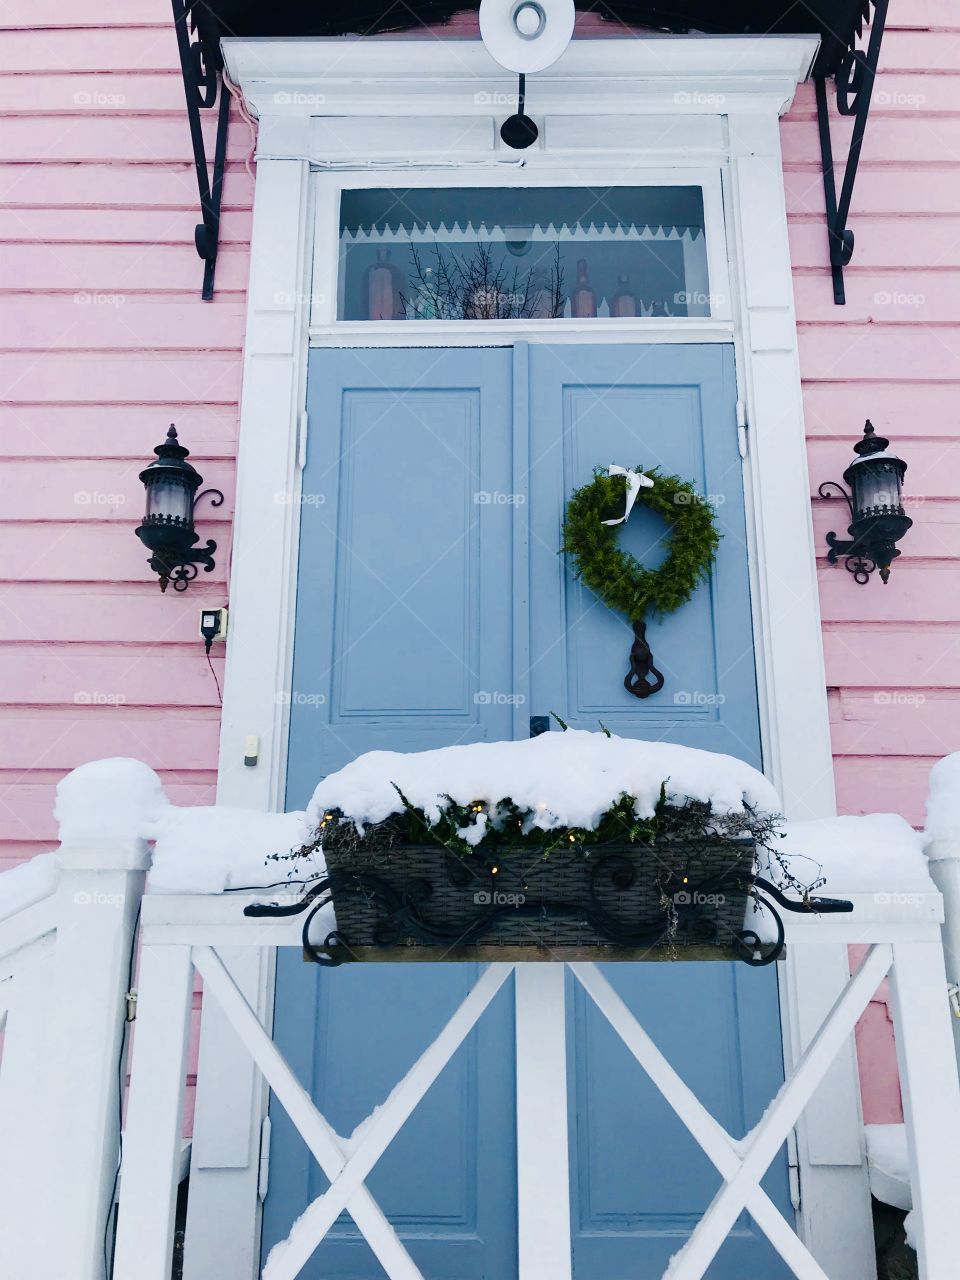     the door of the apartment house, decorated for Christmas. Finland 🇫🇮 Suomi ,Finland🇫🇮🇫🇮🇫🇮🇫🇮- Christmas in Finland Hamina in winter ❄️